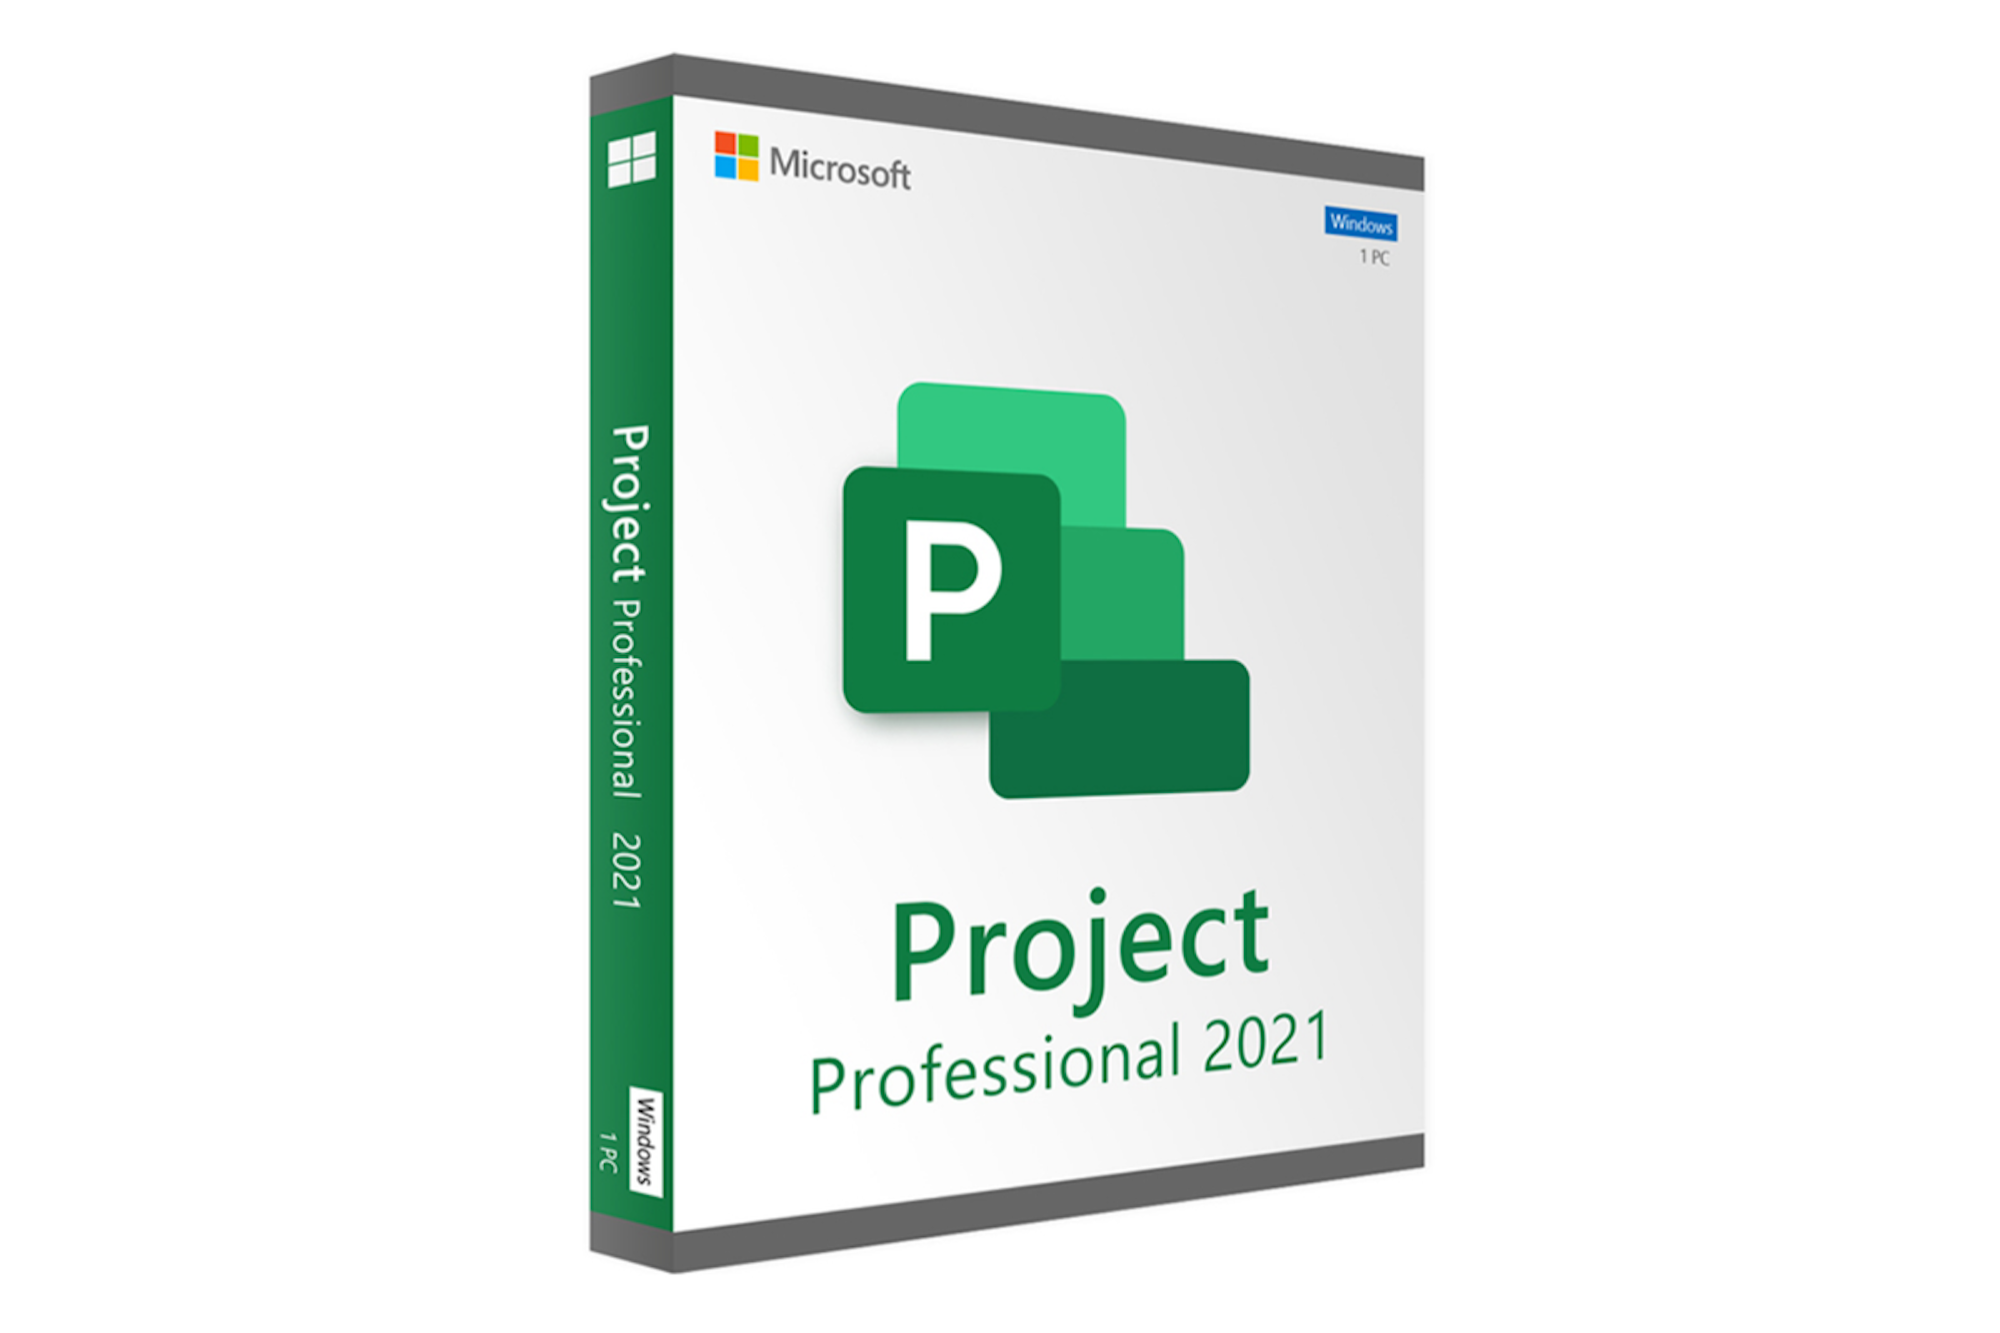 Grab Microsoft Project Professional 2021 for $20 During This Flash Sale